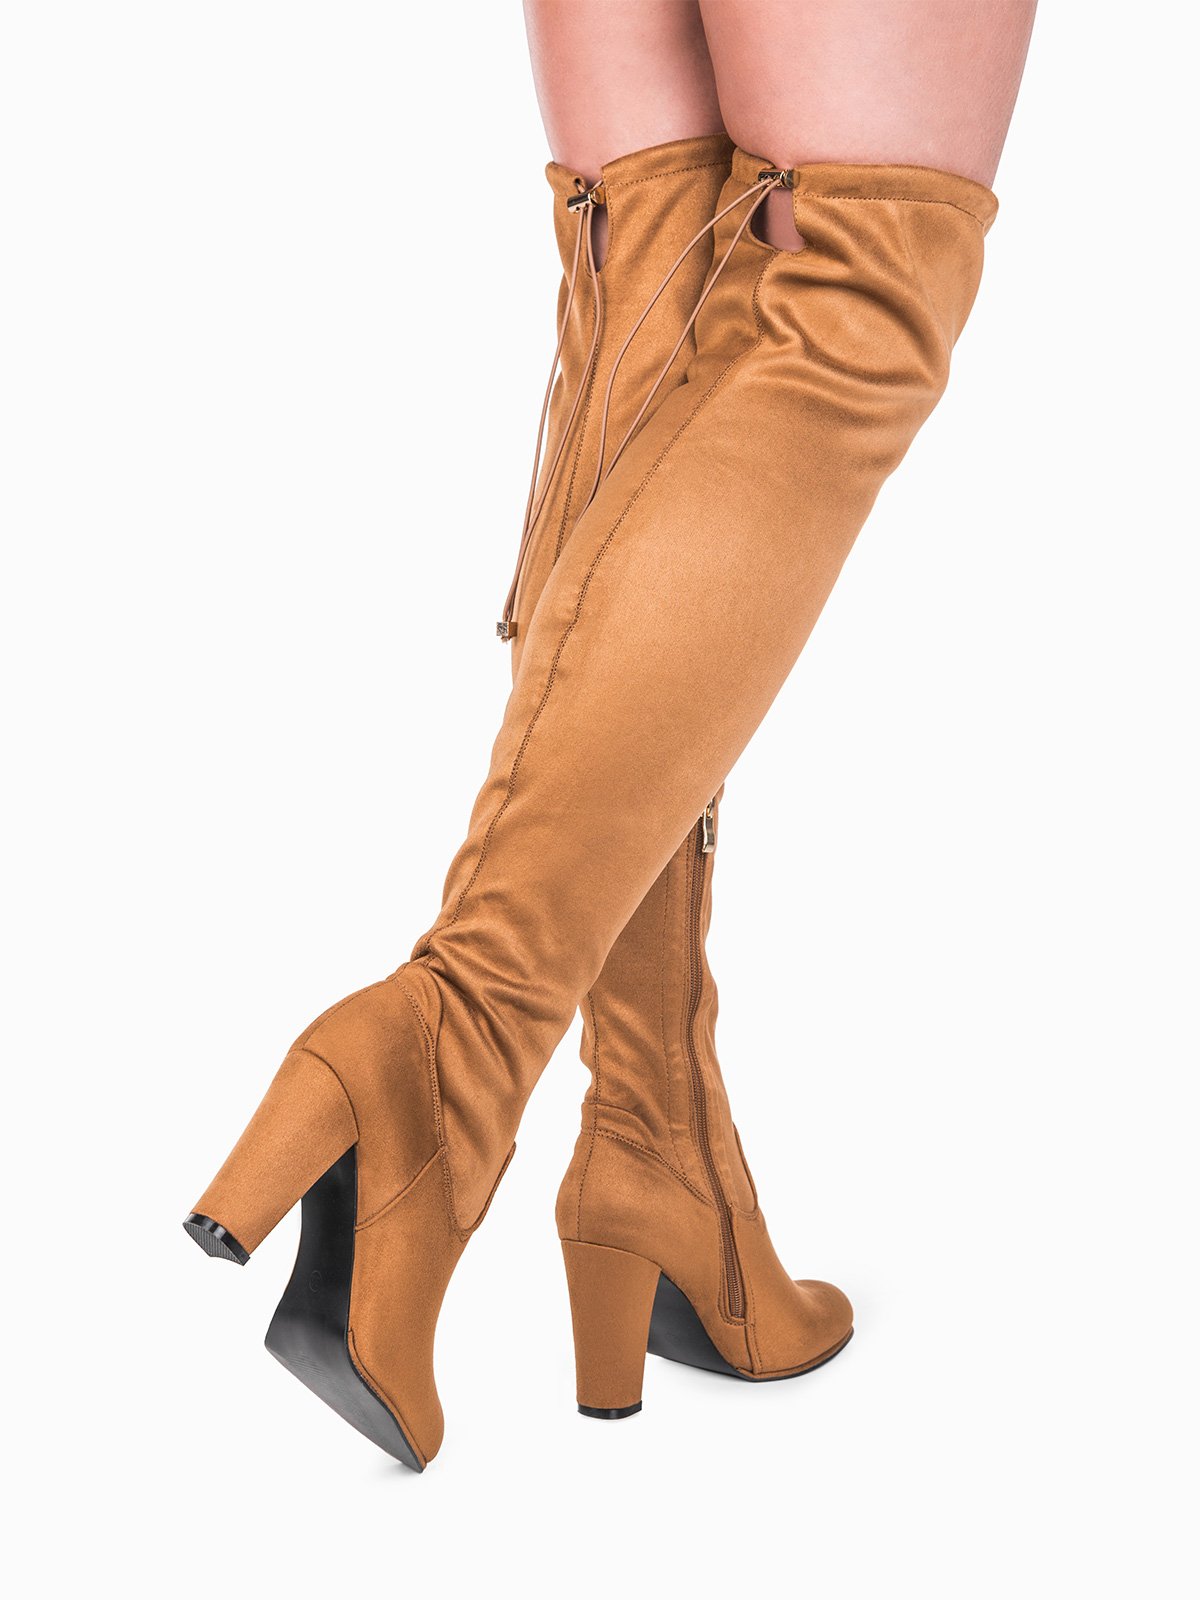 Amazon Over The Knee Boots Camel / Accessorize your daytime wardrobe